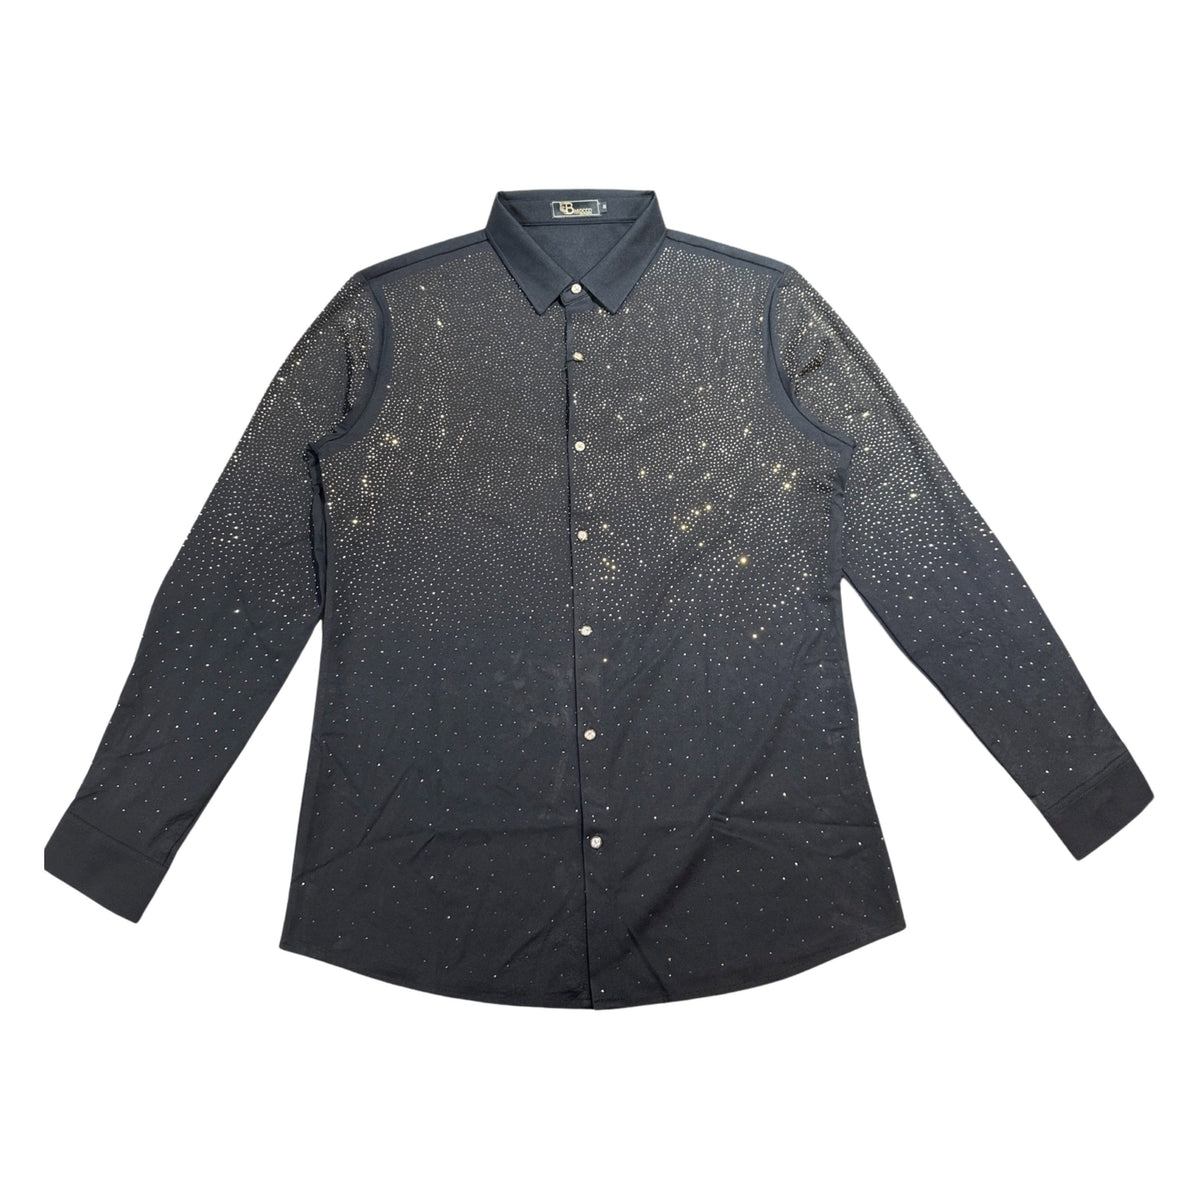 Barocco Black/Gold Fully Loaded Crystal Button Up Shirt